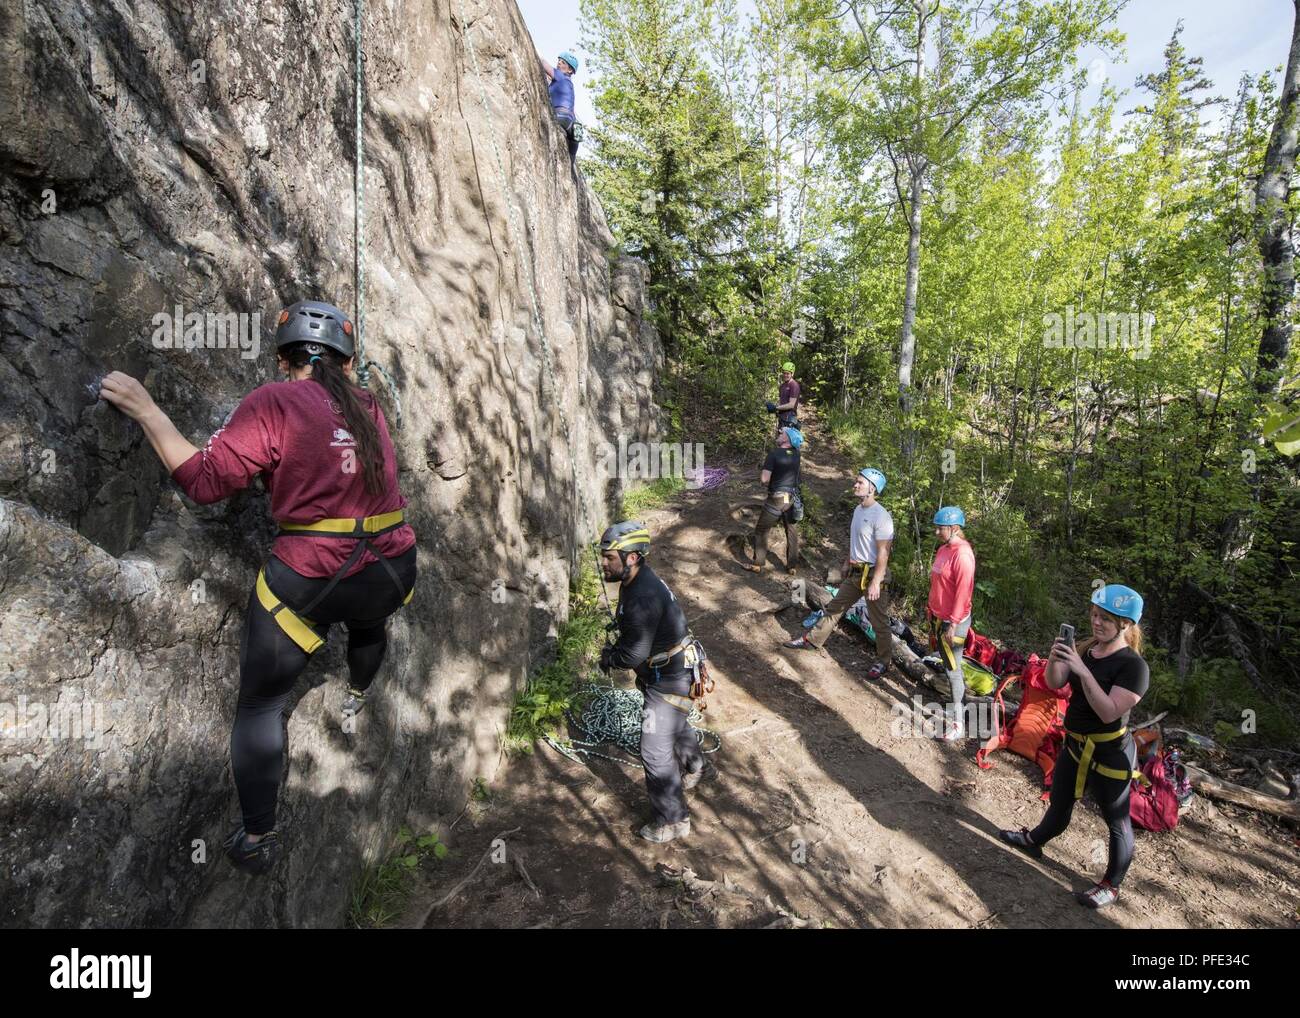 A group of climbers look on and cheer as two climbers in their group ascend during an Outdoor Adventure Program rock-climbing trip at Pivot Point Trail near Anchorage, Alaska, May 31, 2018. The OAP offers low-cost opportunities for the Joint Base Elmendorf-Richardson community to explore Alaska while also supporting the development of mission-ready military families and members. Stock Photo